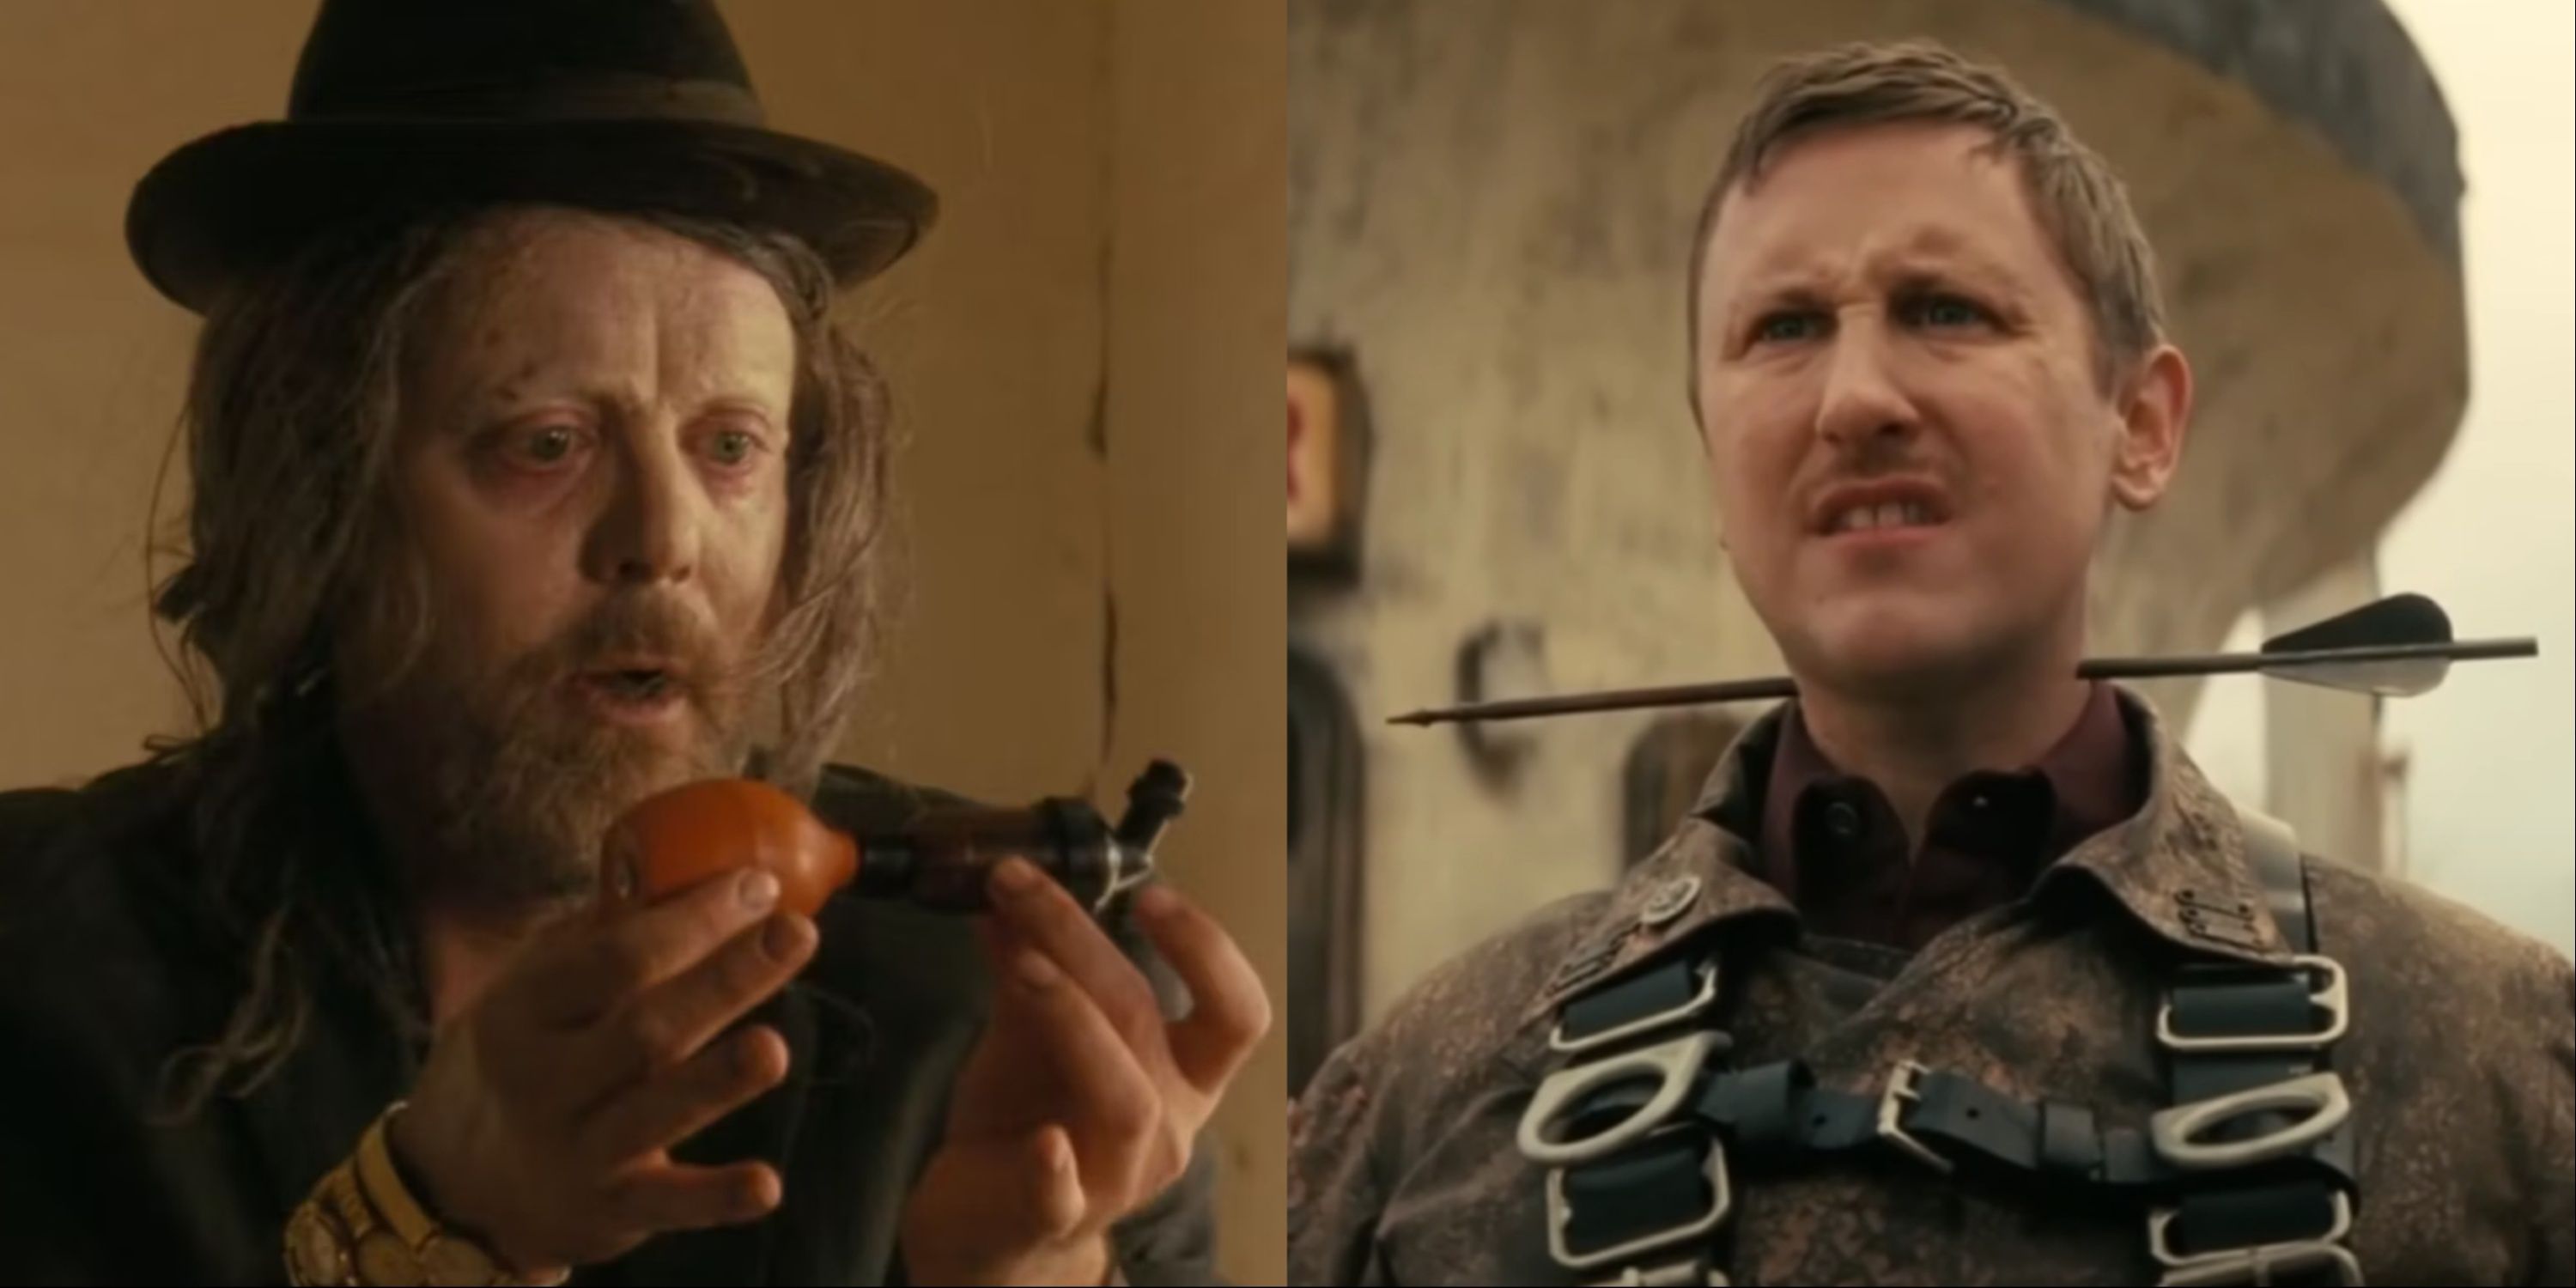 Split-image of the Snake Oil Salesman in Fallout presenting Thaddeus with his mysterious serum and Thaddeus with an arrow through his neck.